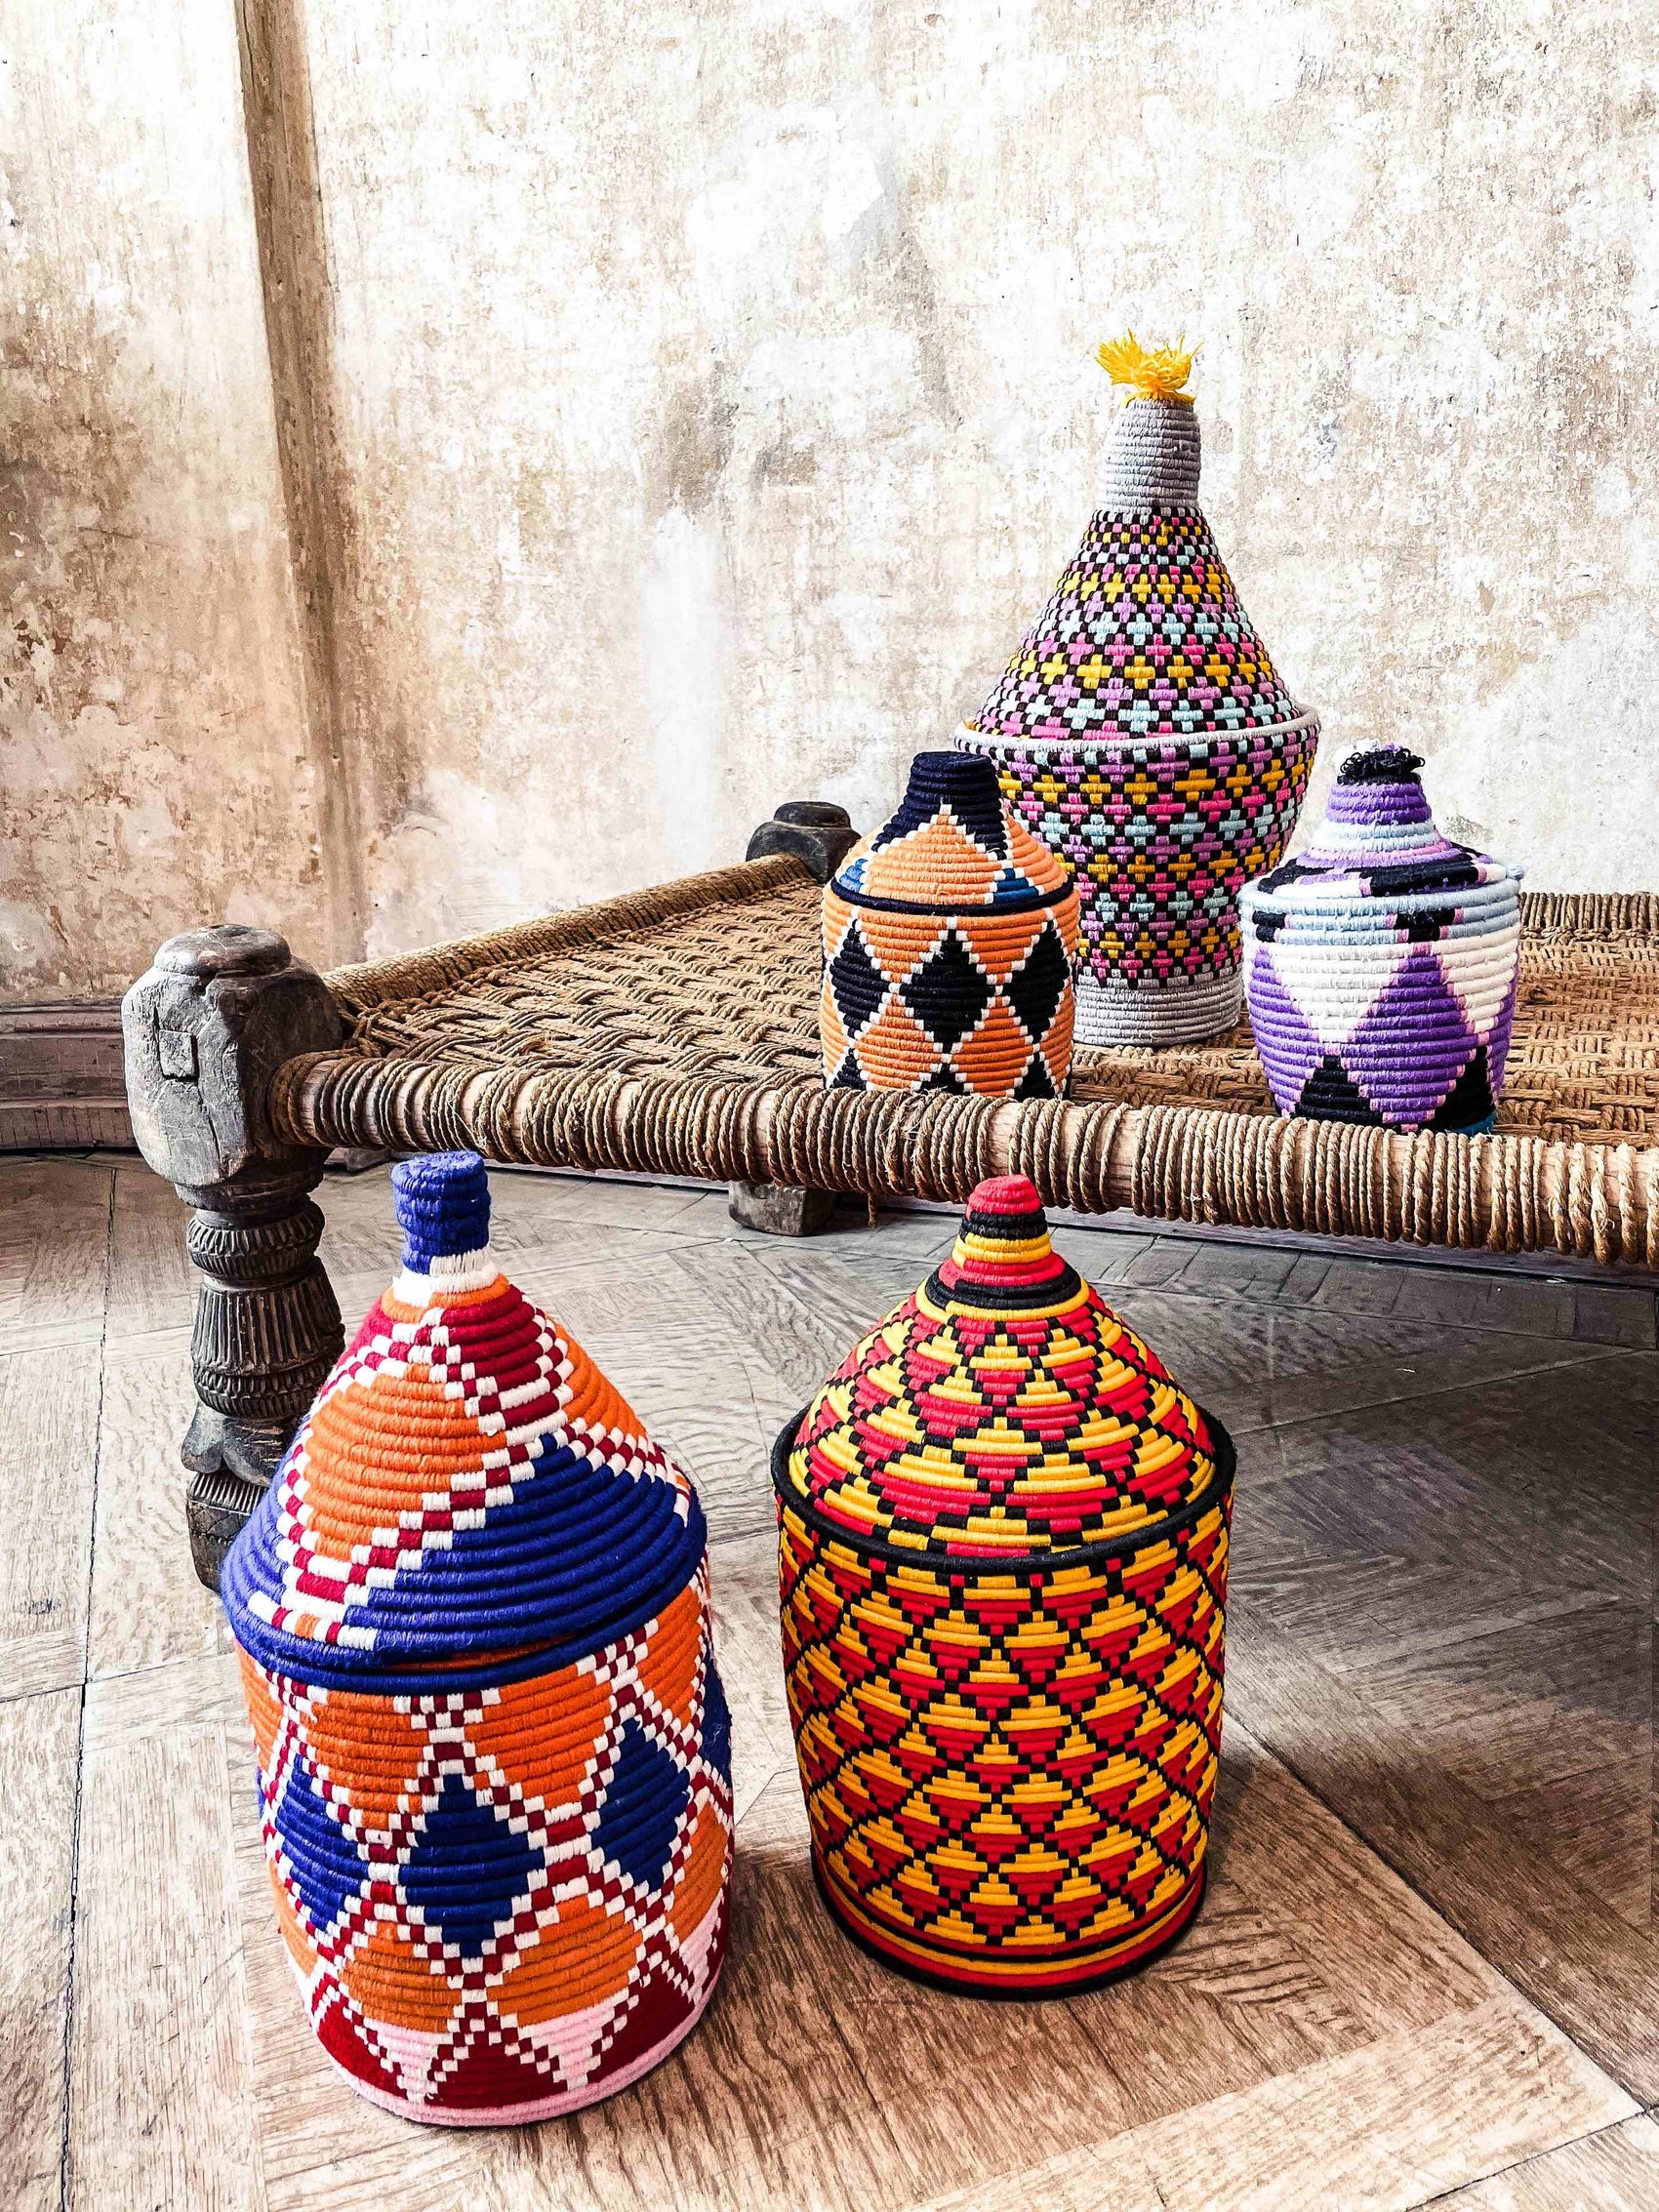 baskets from Morocco